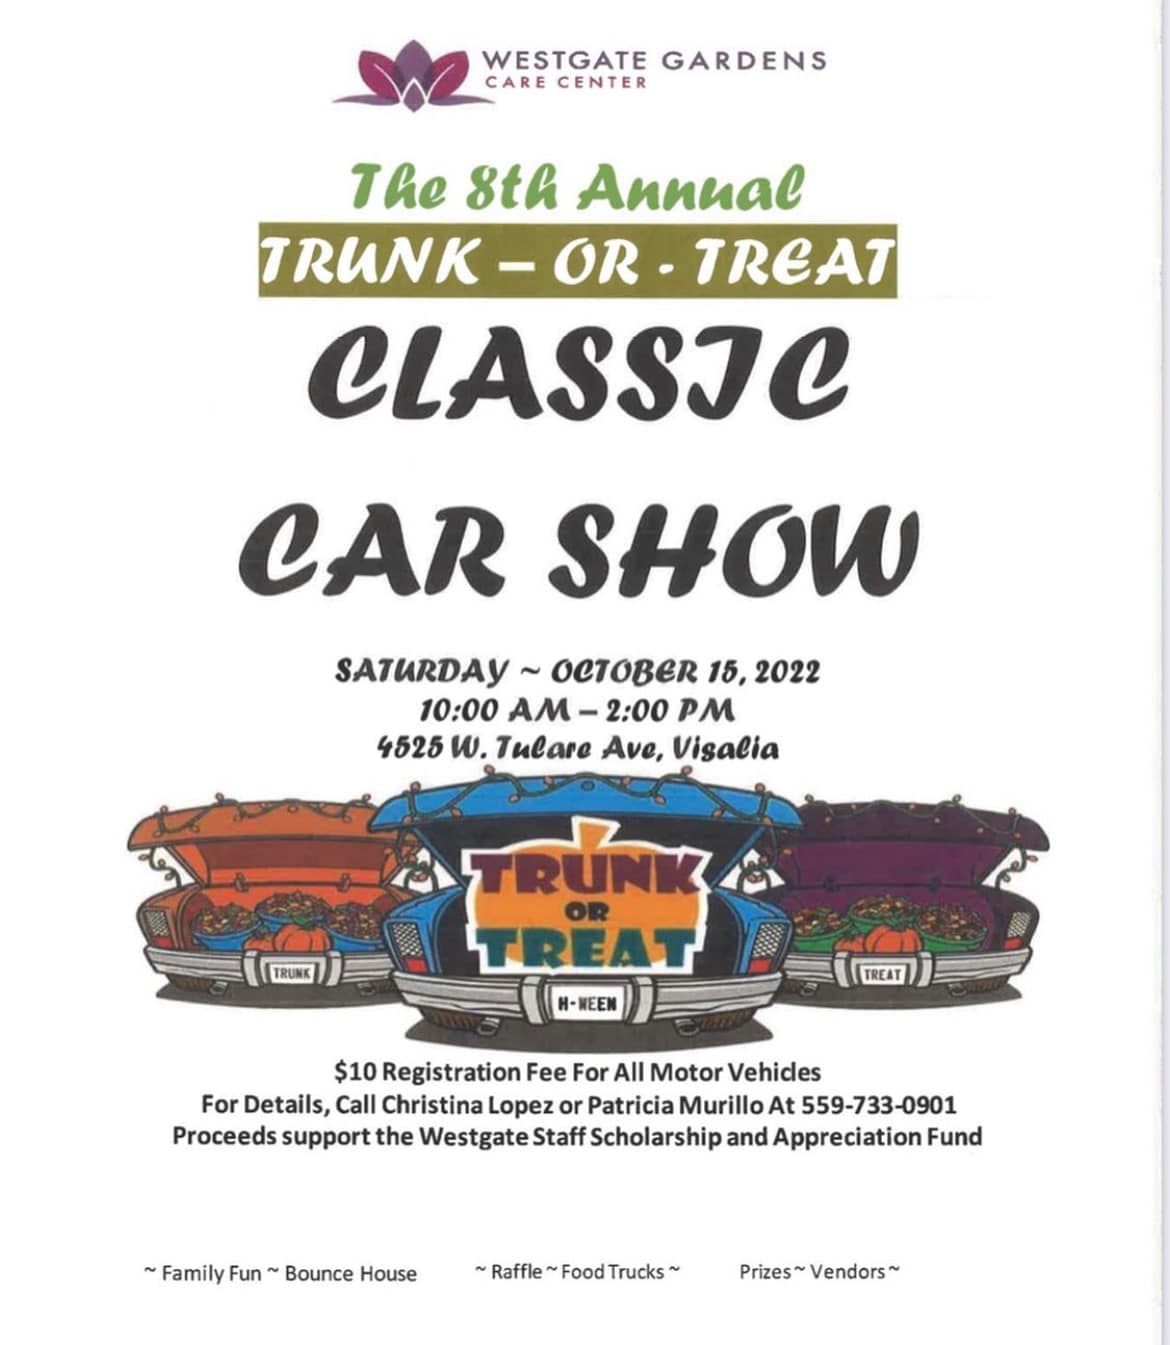 Trunk or Treat Classic Car Show